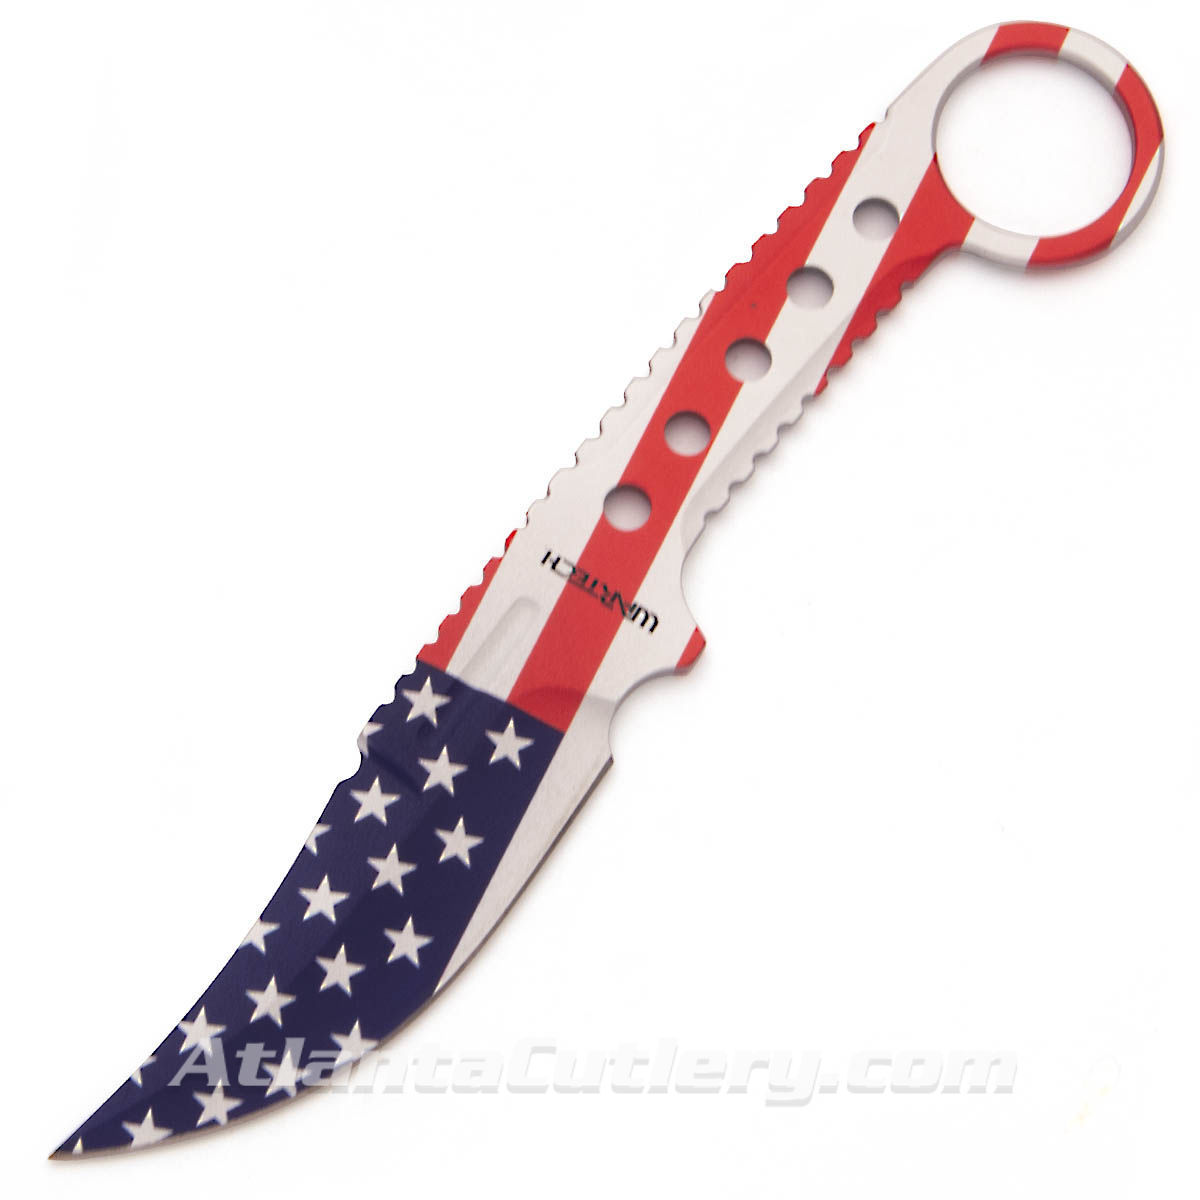 Red, White and Blue Wartech Old Glory Knife is crafted from a single piece of 3CR13 stainless steel